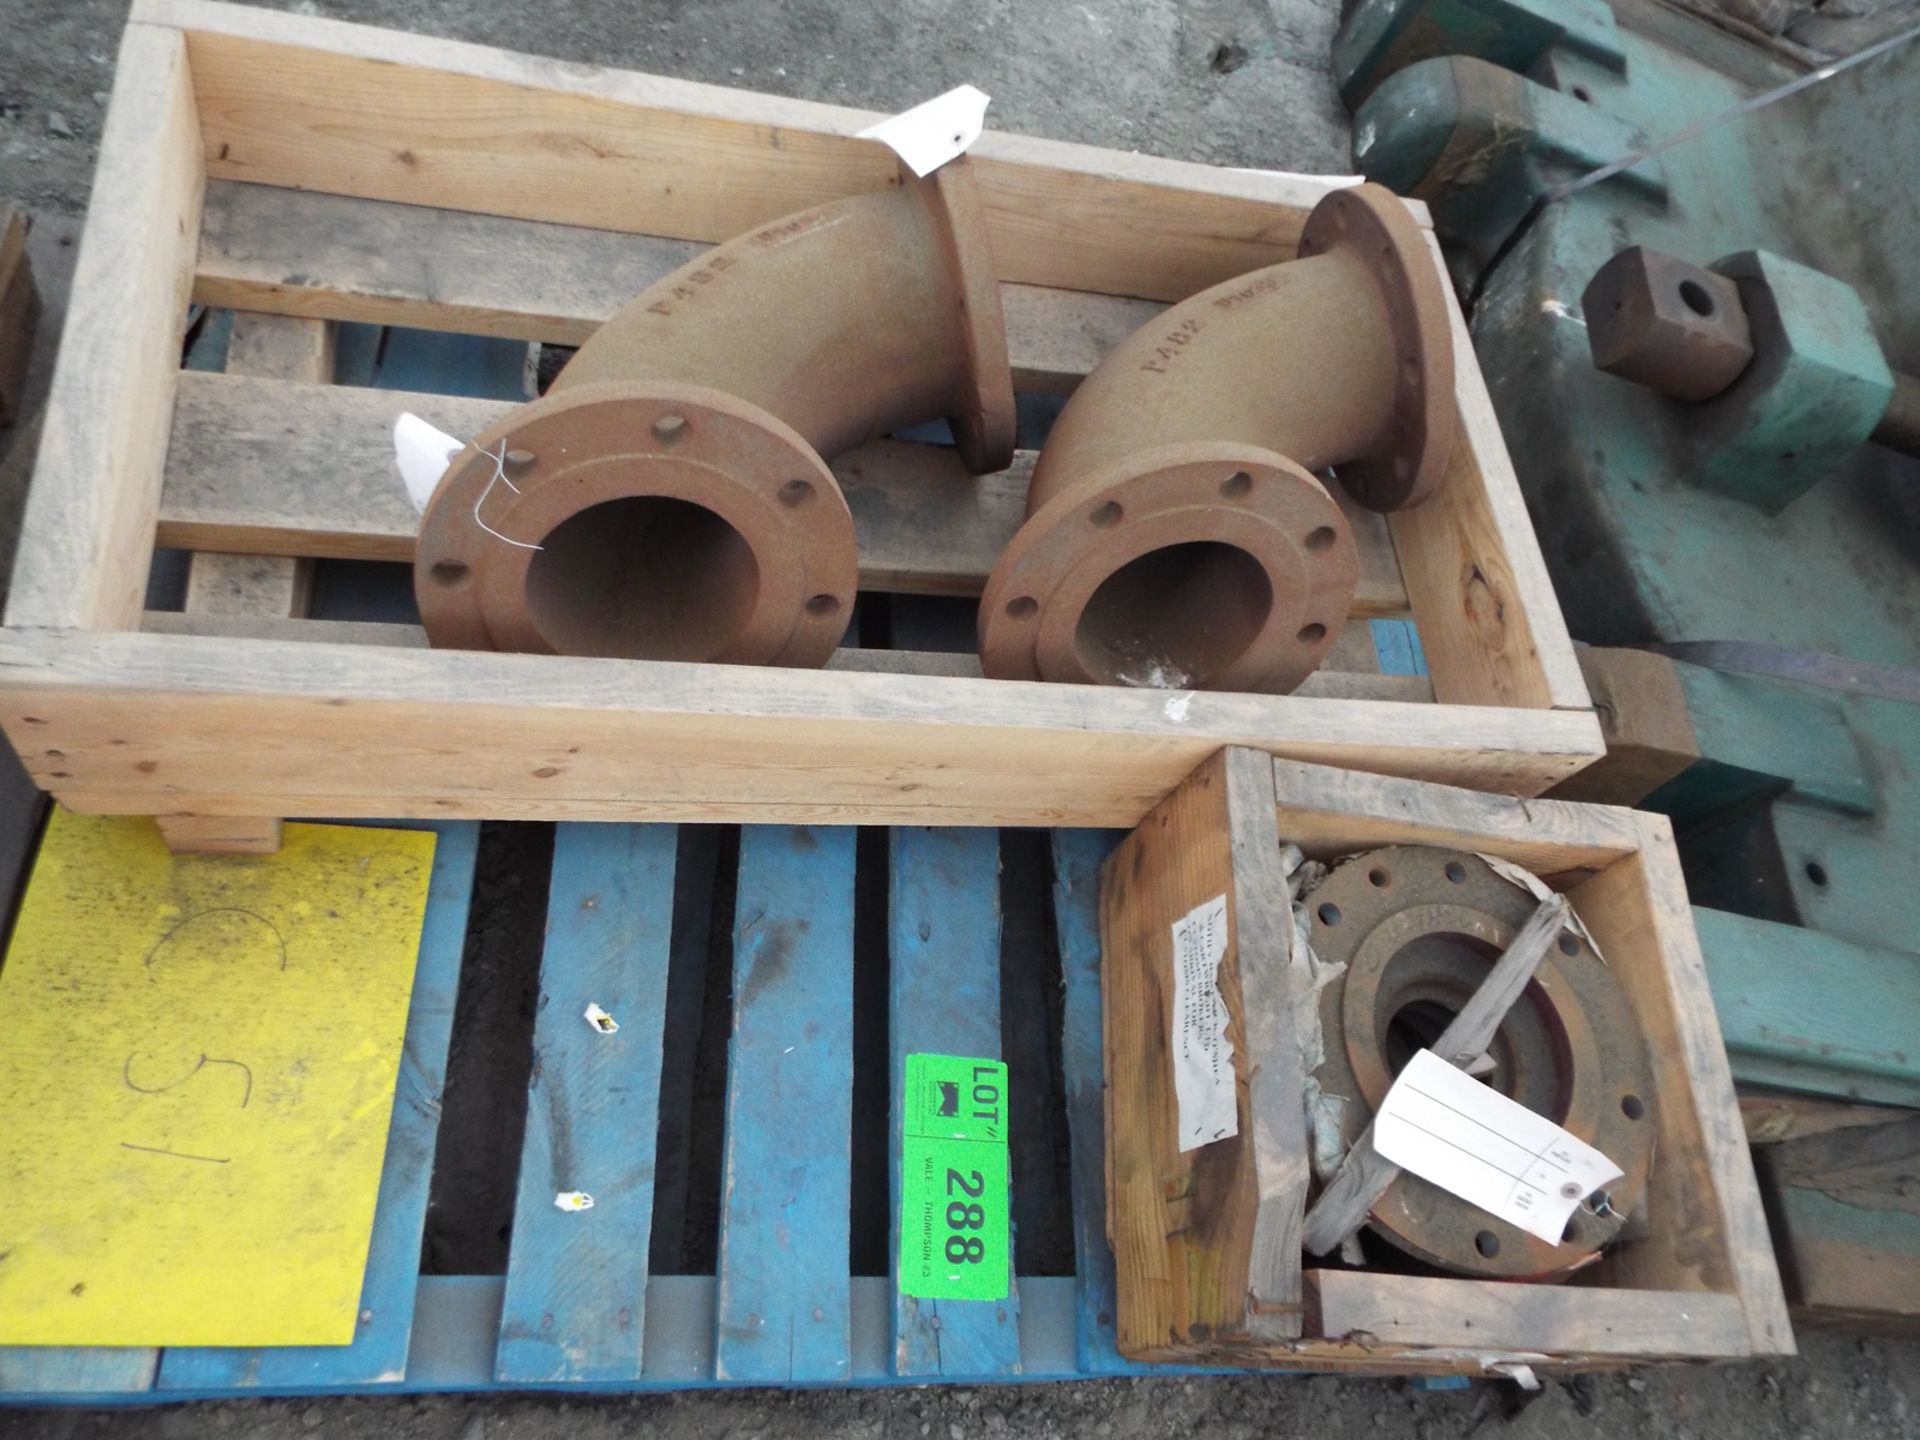 LOT/ CONTENTS OF SKID - (1) 150MM HSG DRIVE END SUPPORT; (2) 6" 90 DEG. PIPE ELBOWS (C-51)